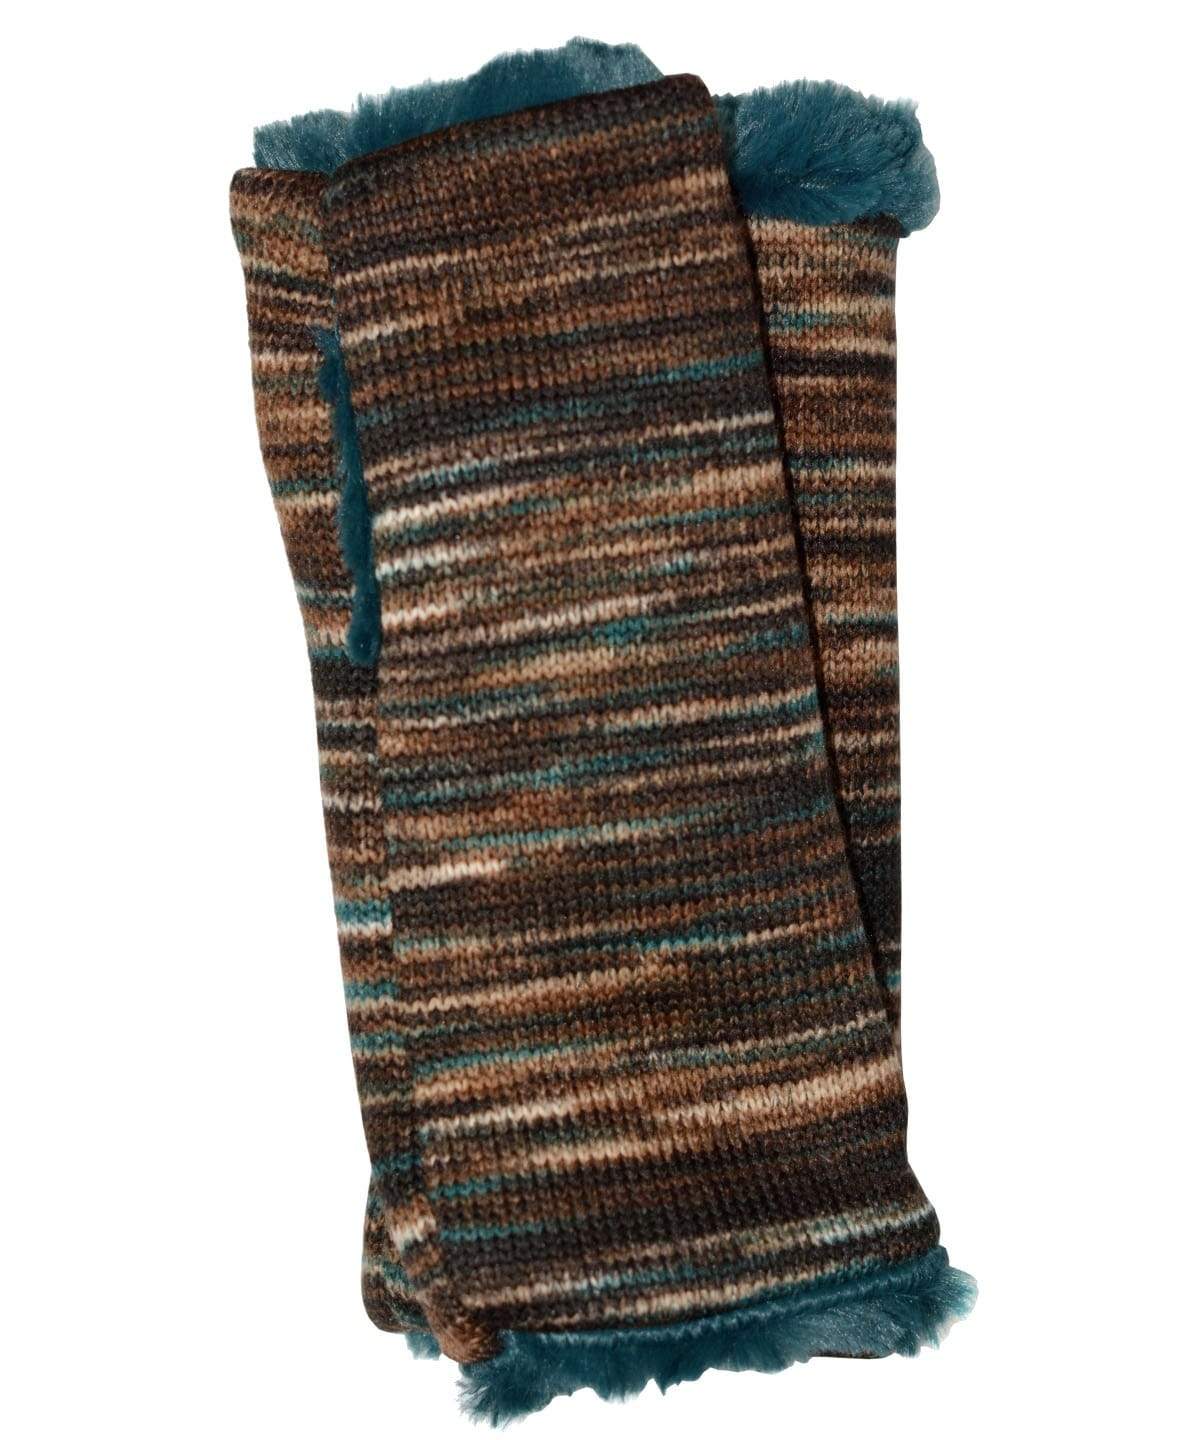 Reversible Fingerless Gloves | Sweet Stripes in English Toffee with Peacock Pond Faux Fur Lining | Pandemonium Millinery